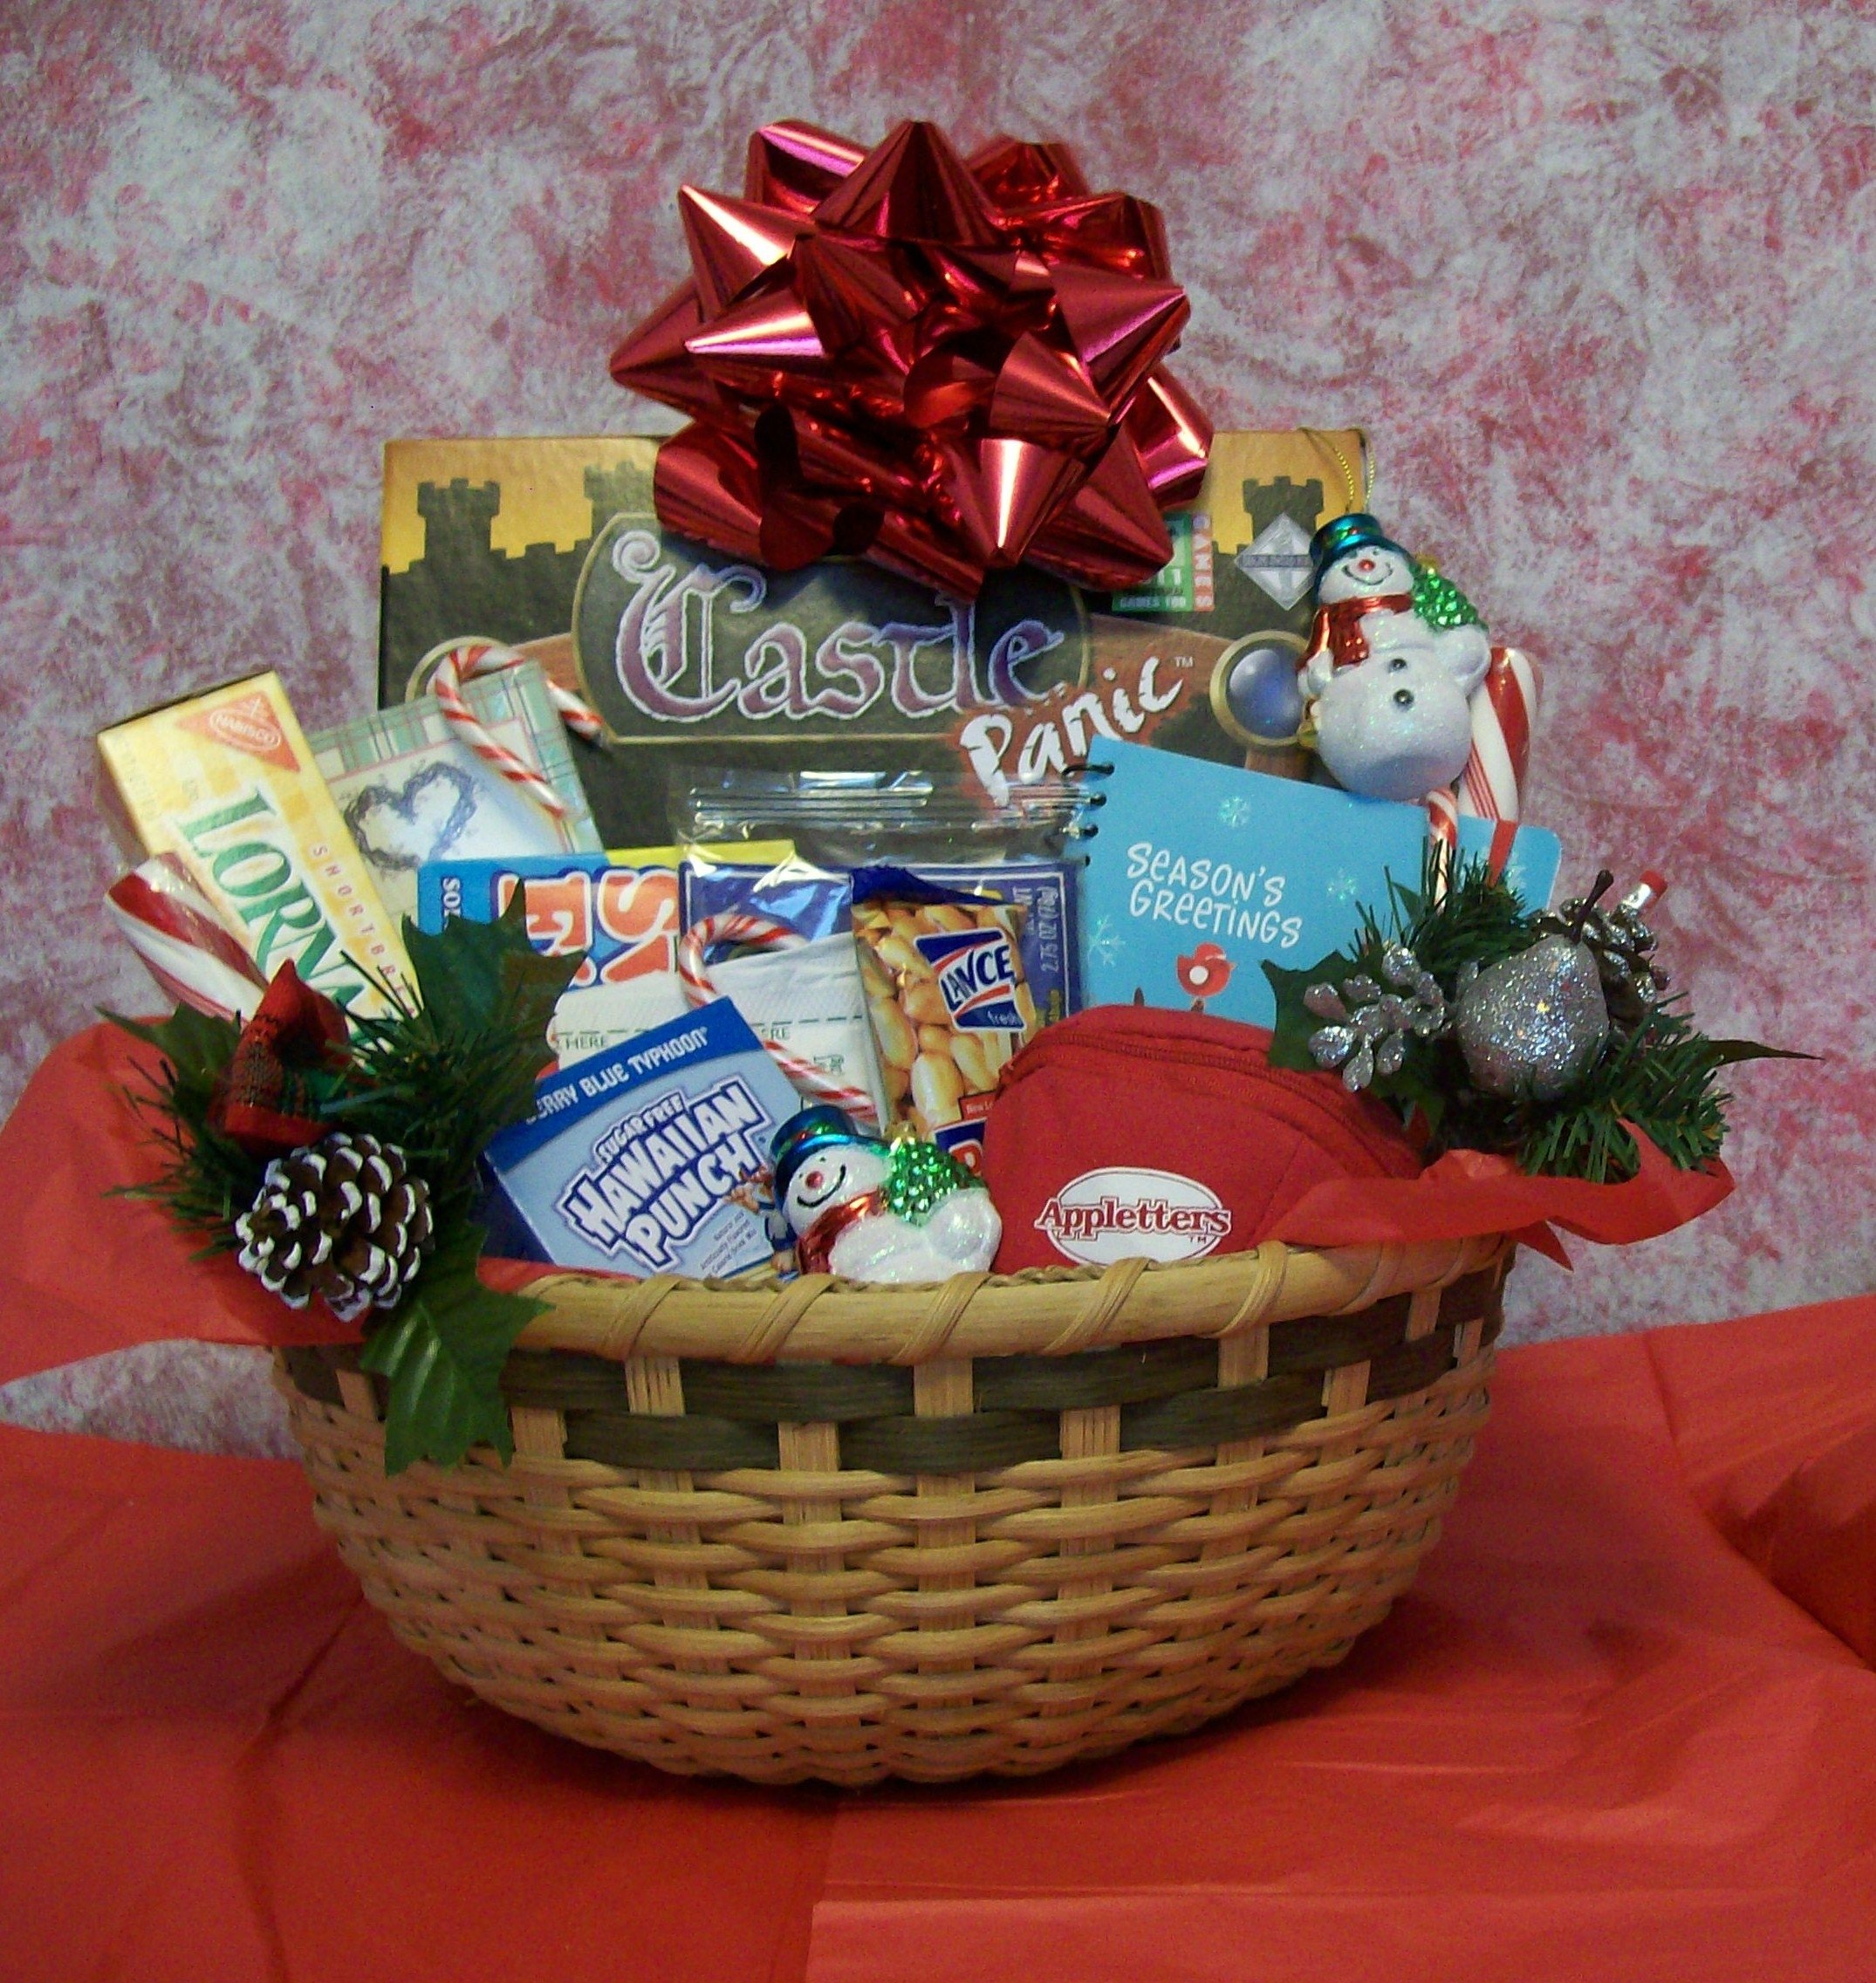 The Family Fun and Games Basket